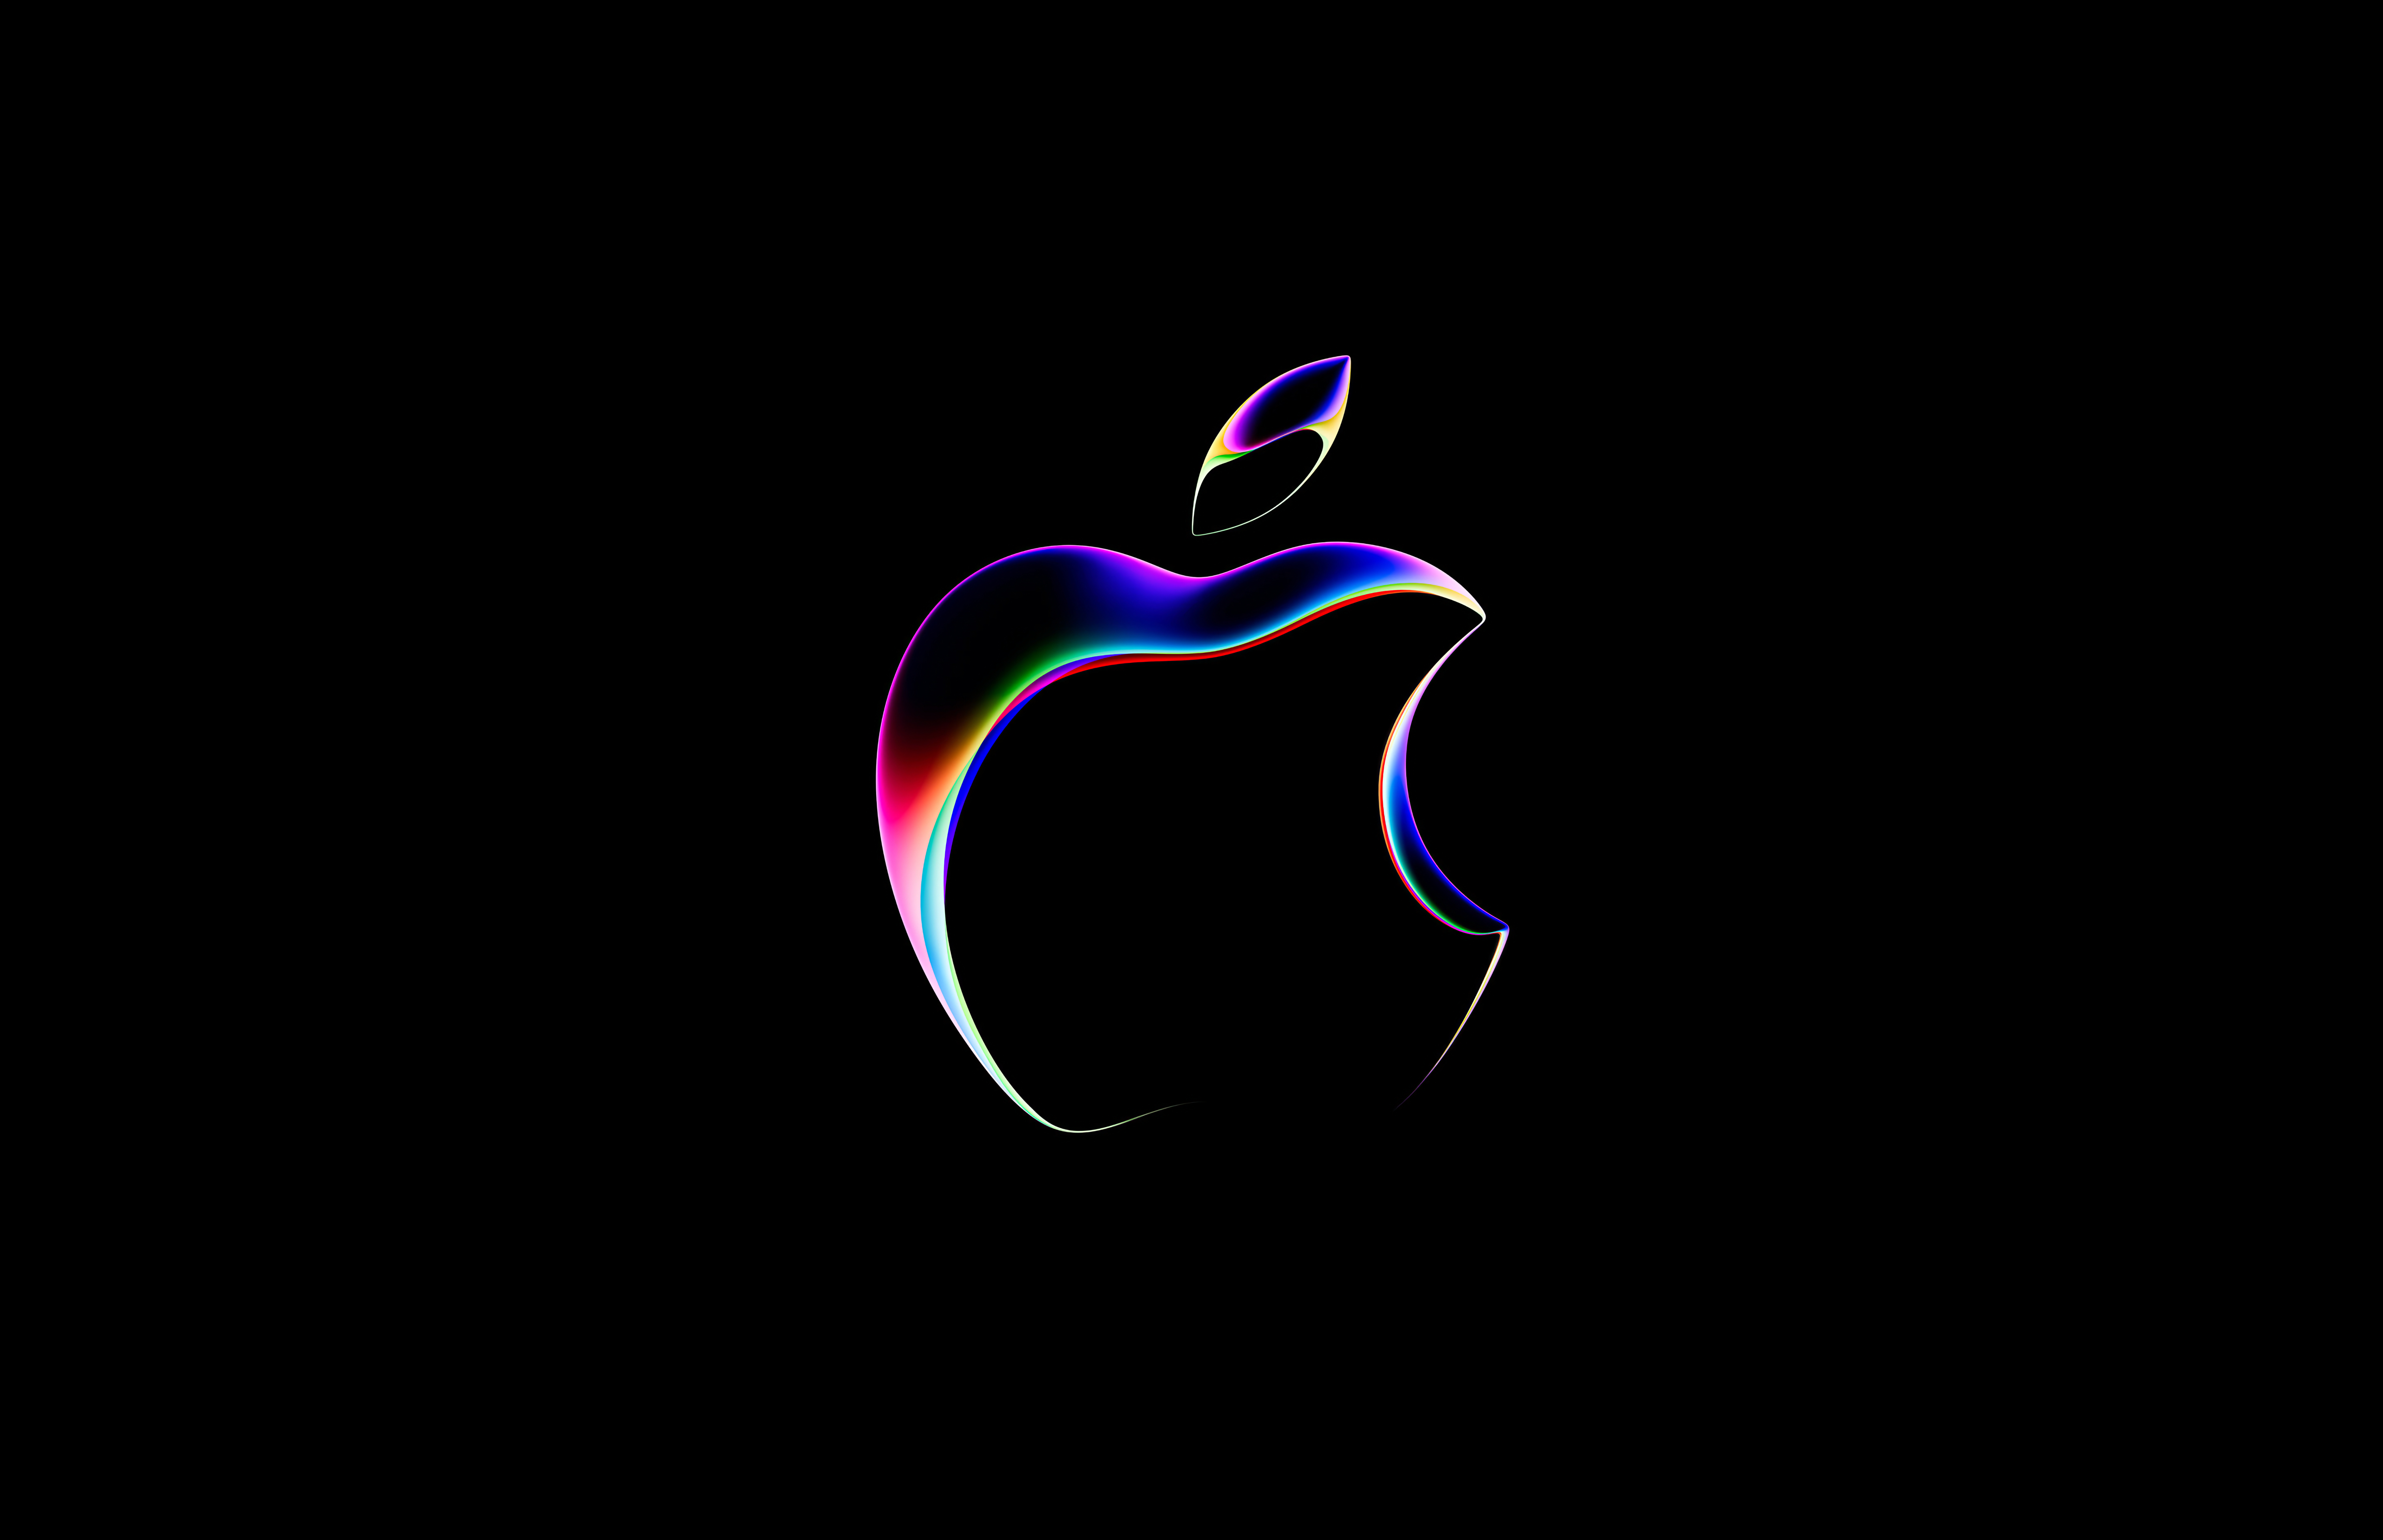 Colorful Design Apple Logo In White Background 4K 5K HD Apple Wallpapers |  HD Wallpapers | ID #95836